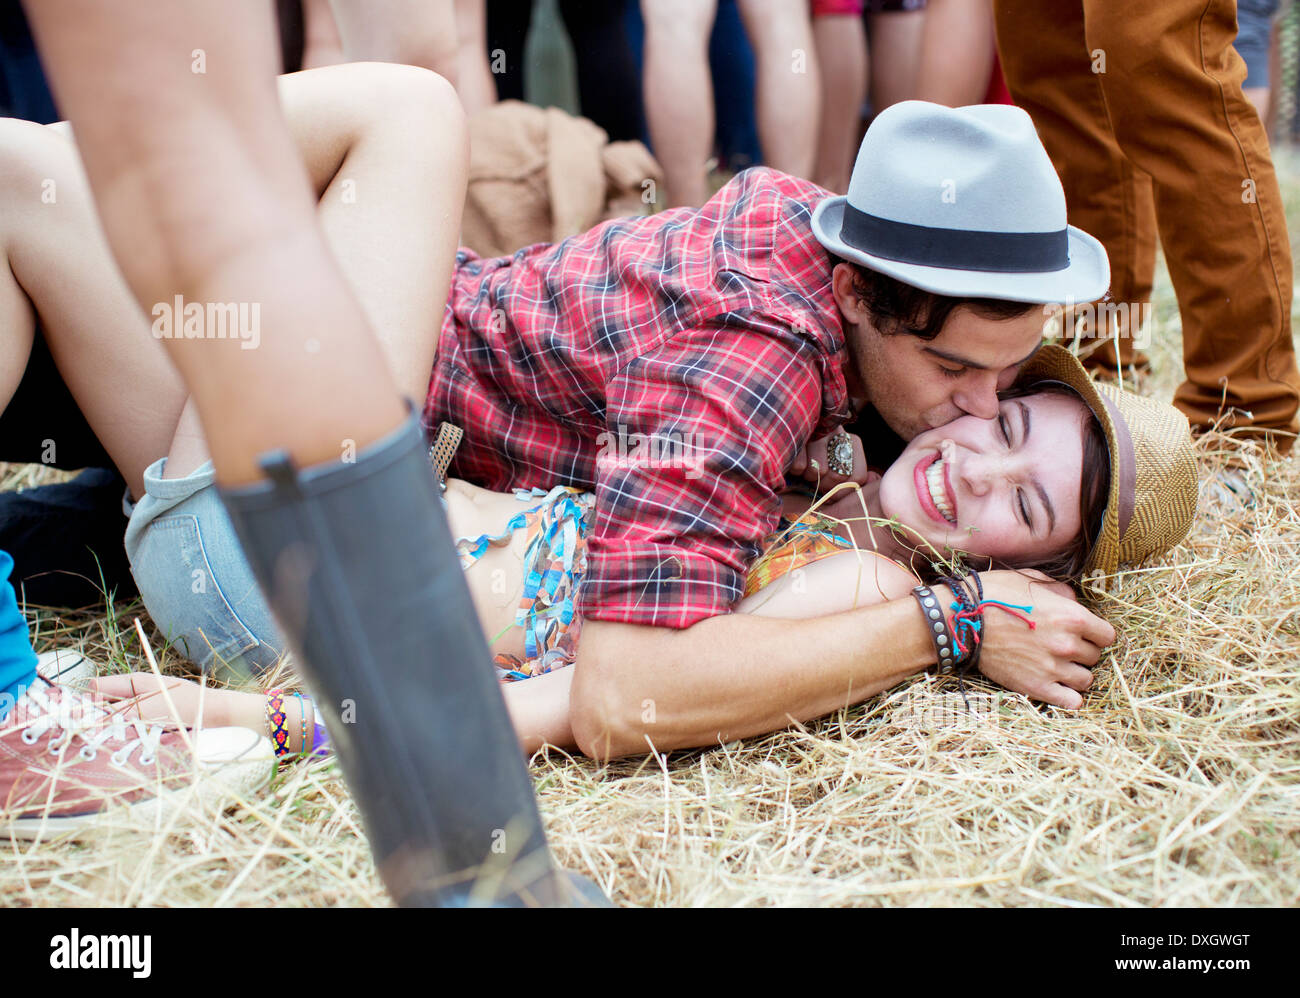 Couple kissing in grass at music festival Stock Photo